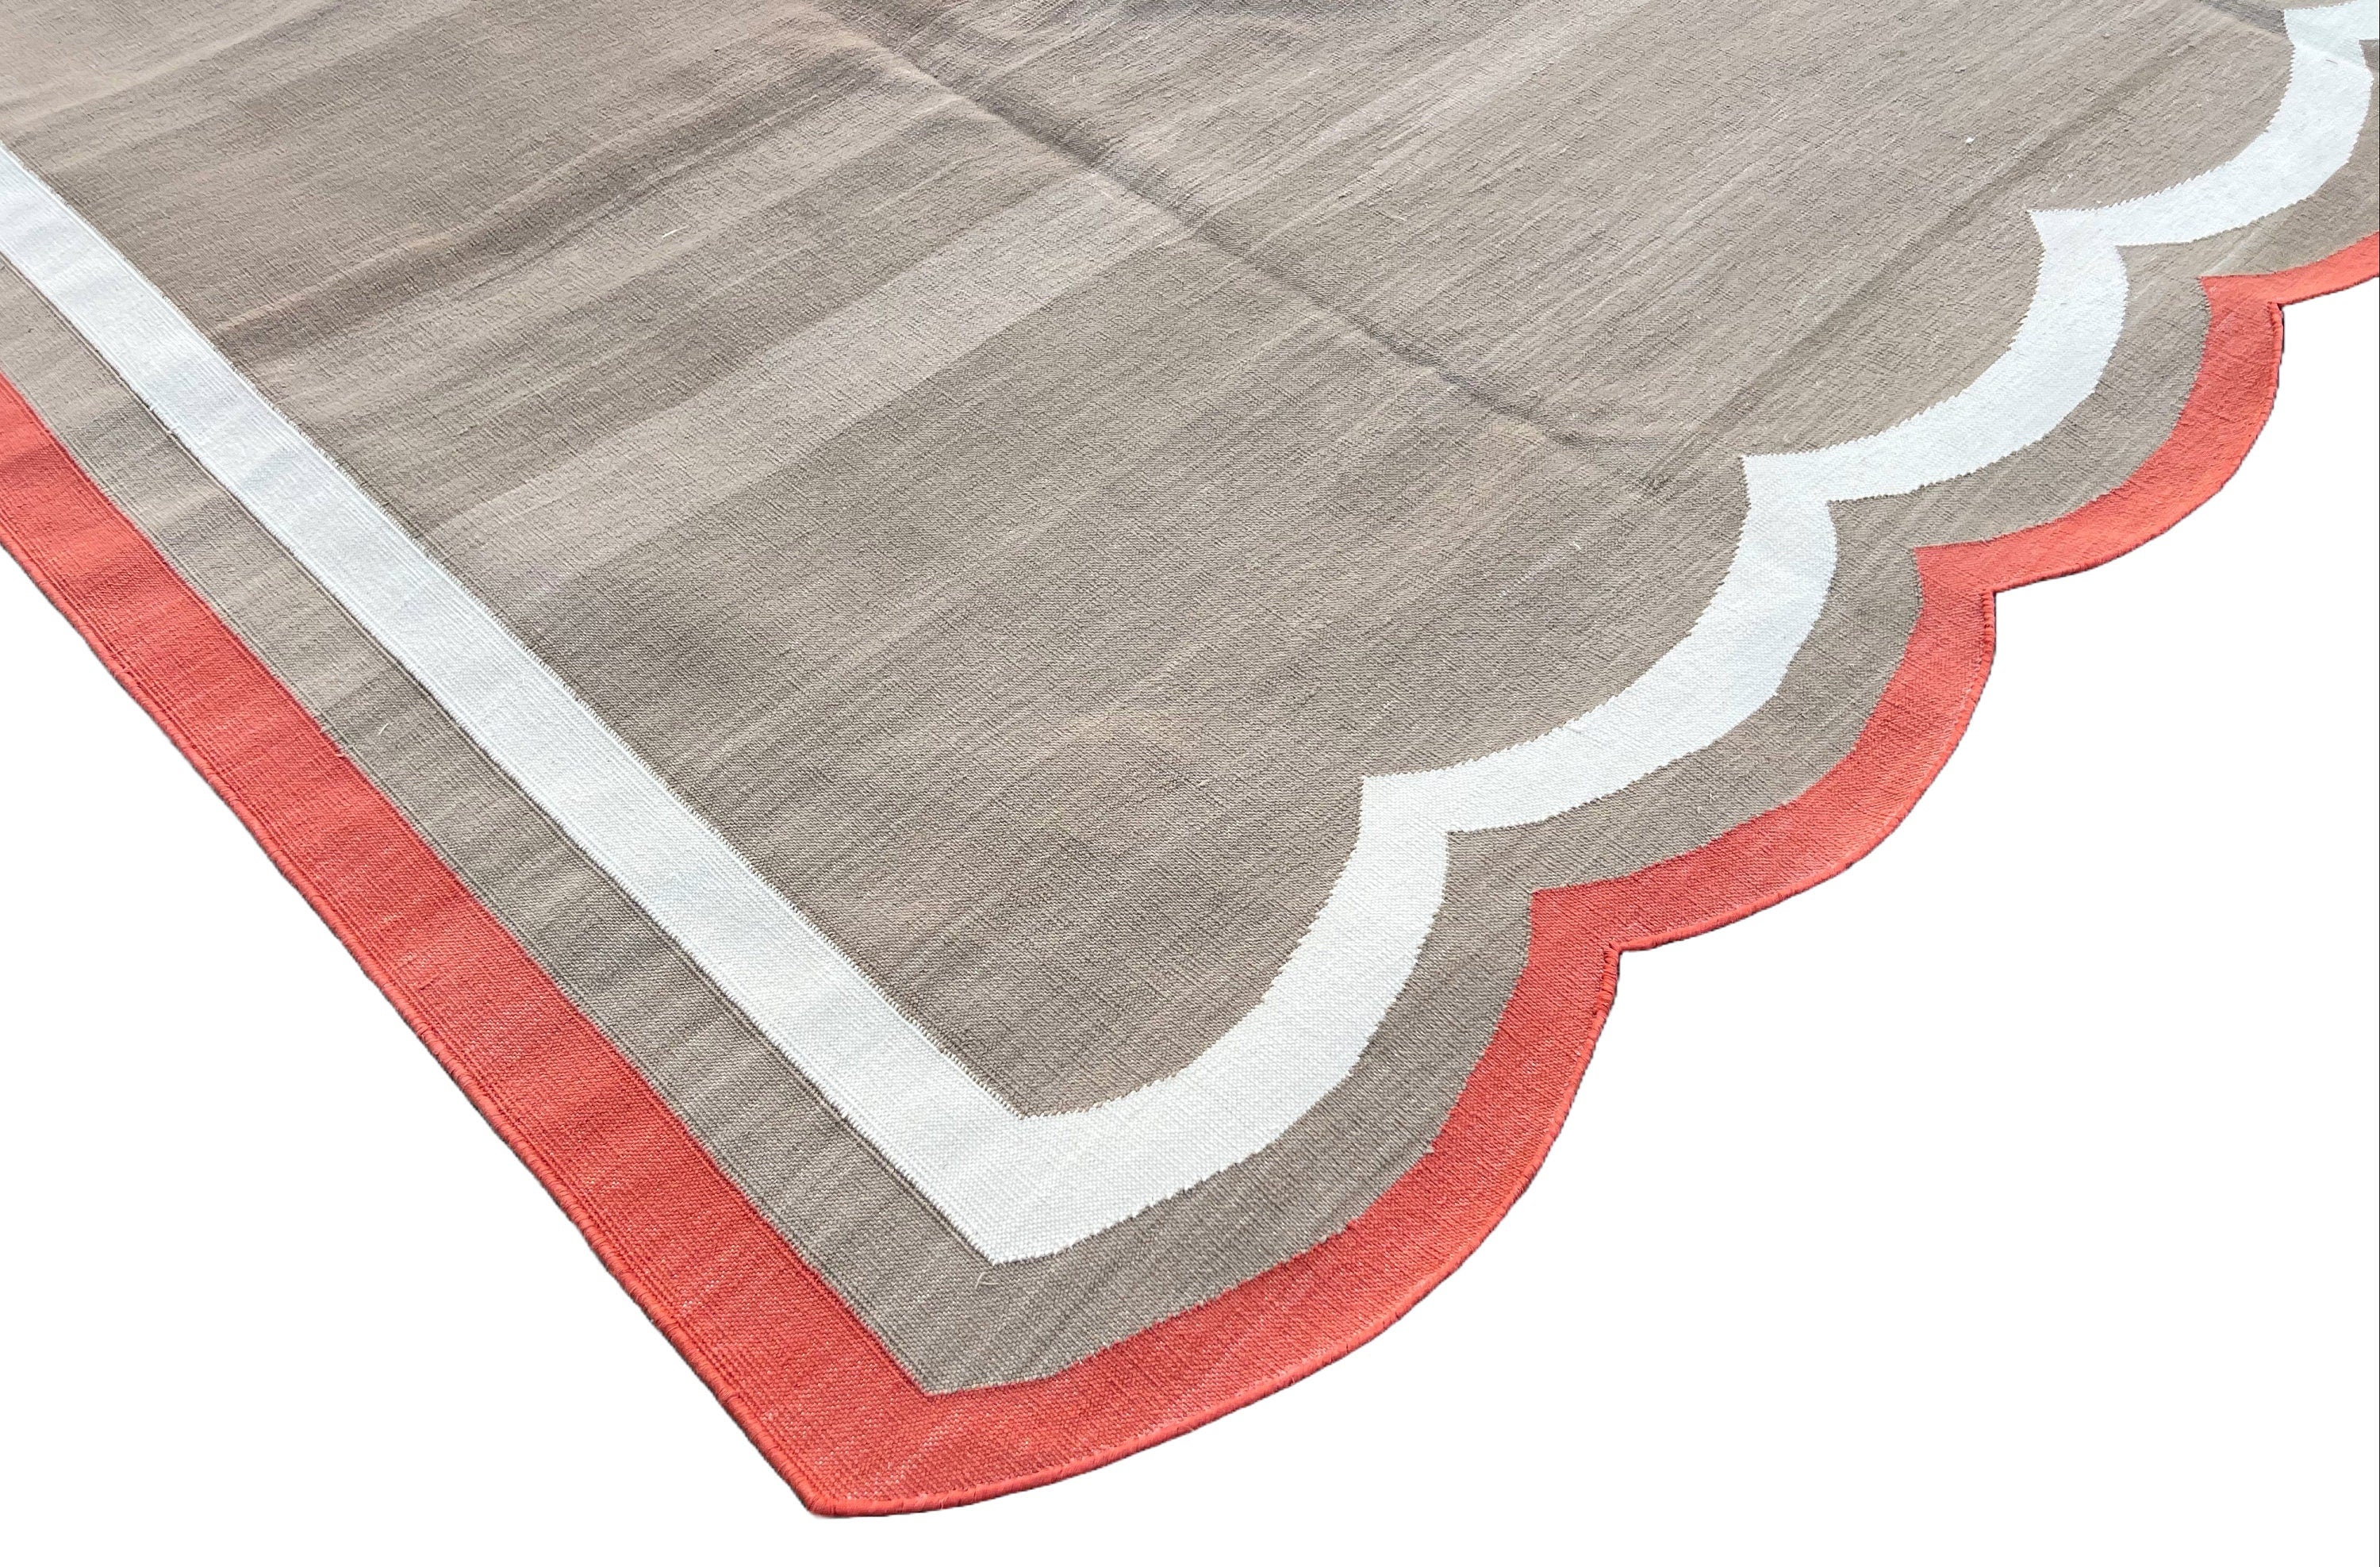 Modern Handmade Cotton Area Flat Weave Rug, Natural Vegetable Dyed, Beige & Red Scalloped Edge Indian Dhurrie, Kilim Striped, Wall Tapestry